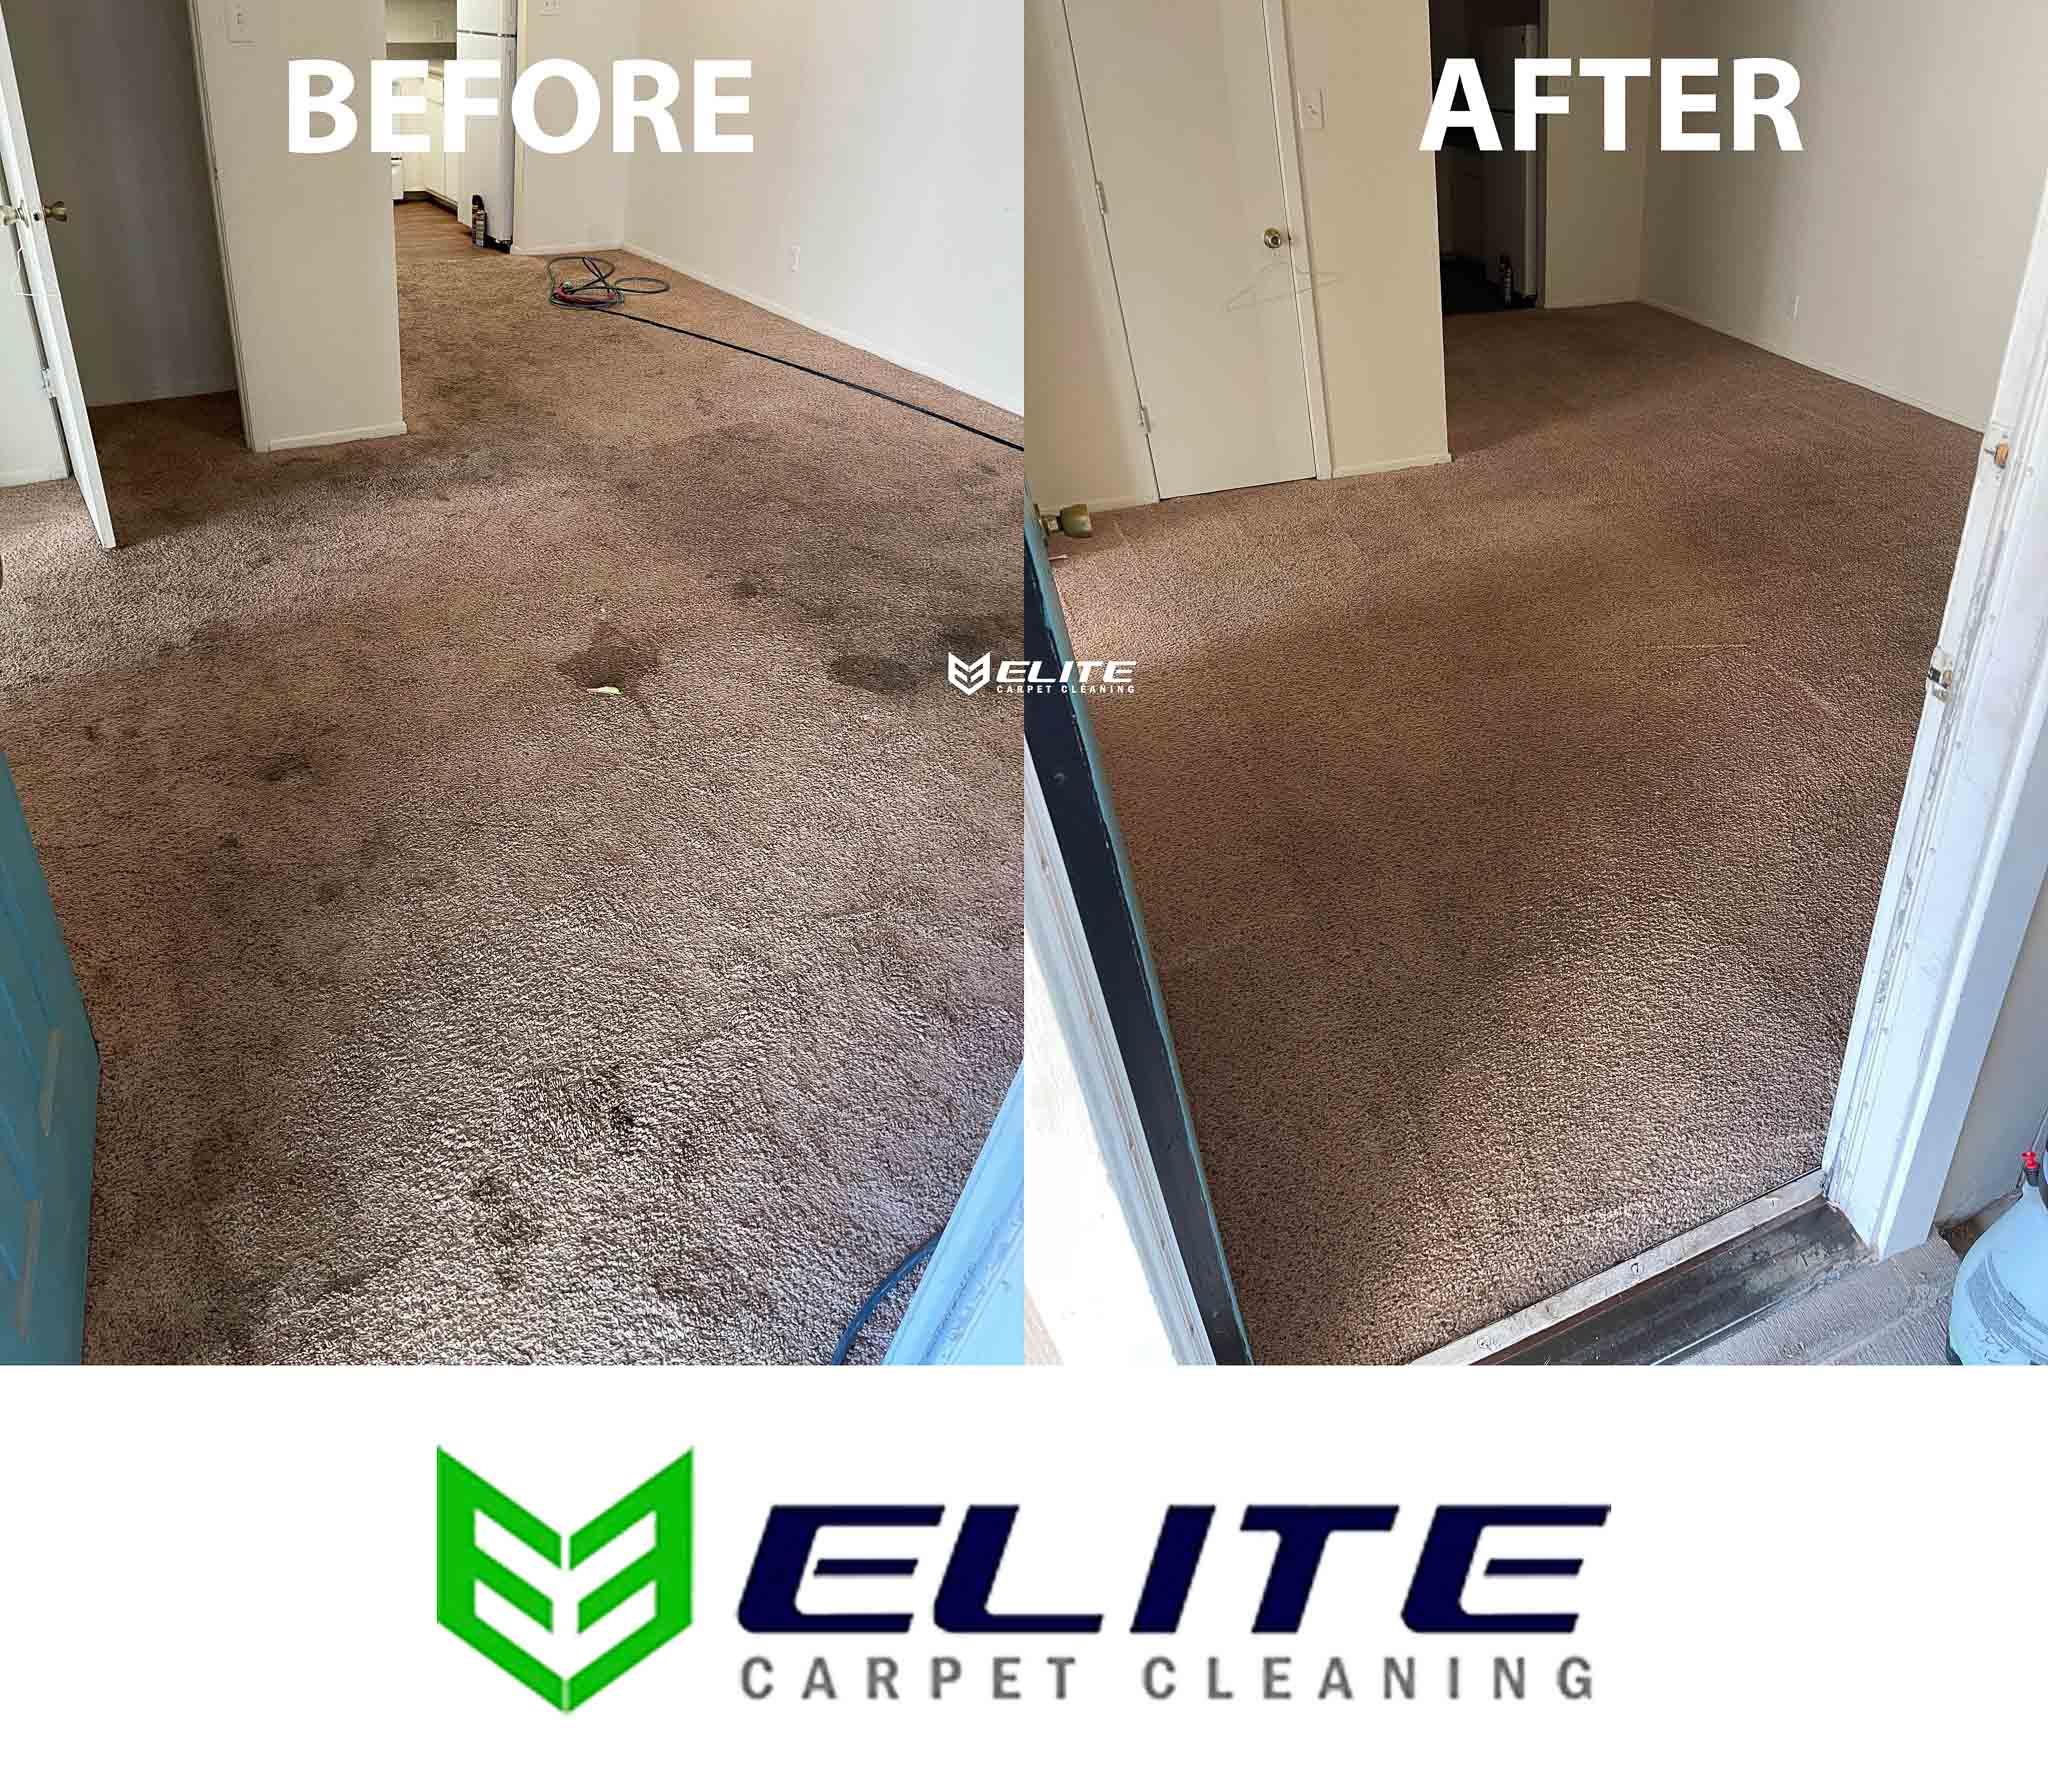 Residential carpet cleaning before and after photo in Andrews tx